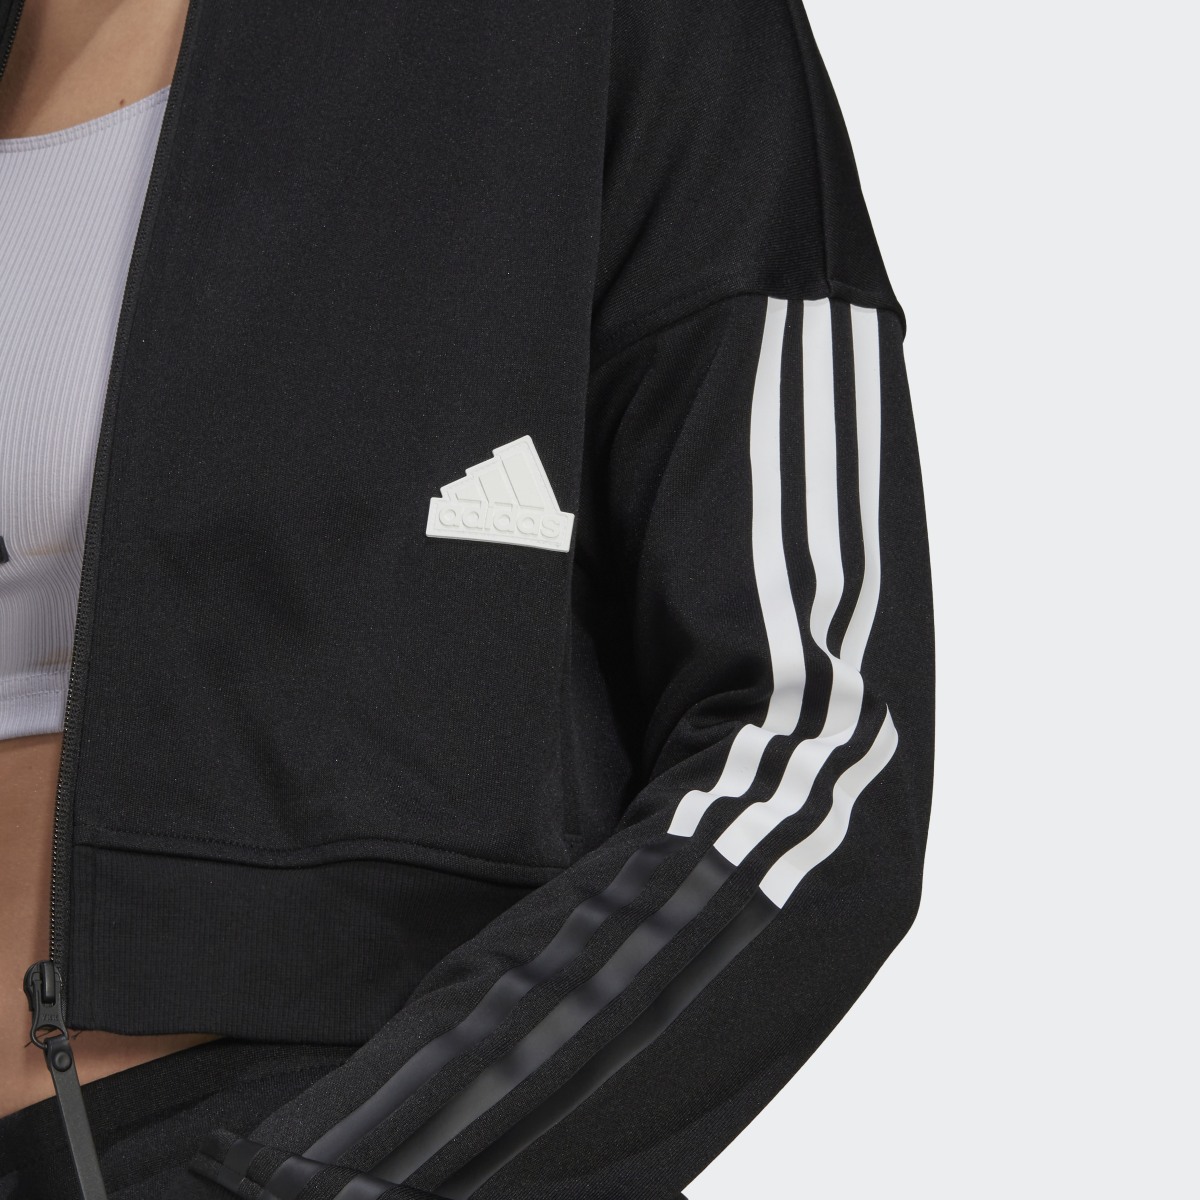 Adidas Cropped Track Top. 8